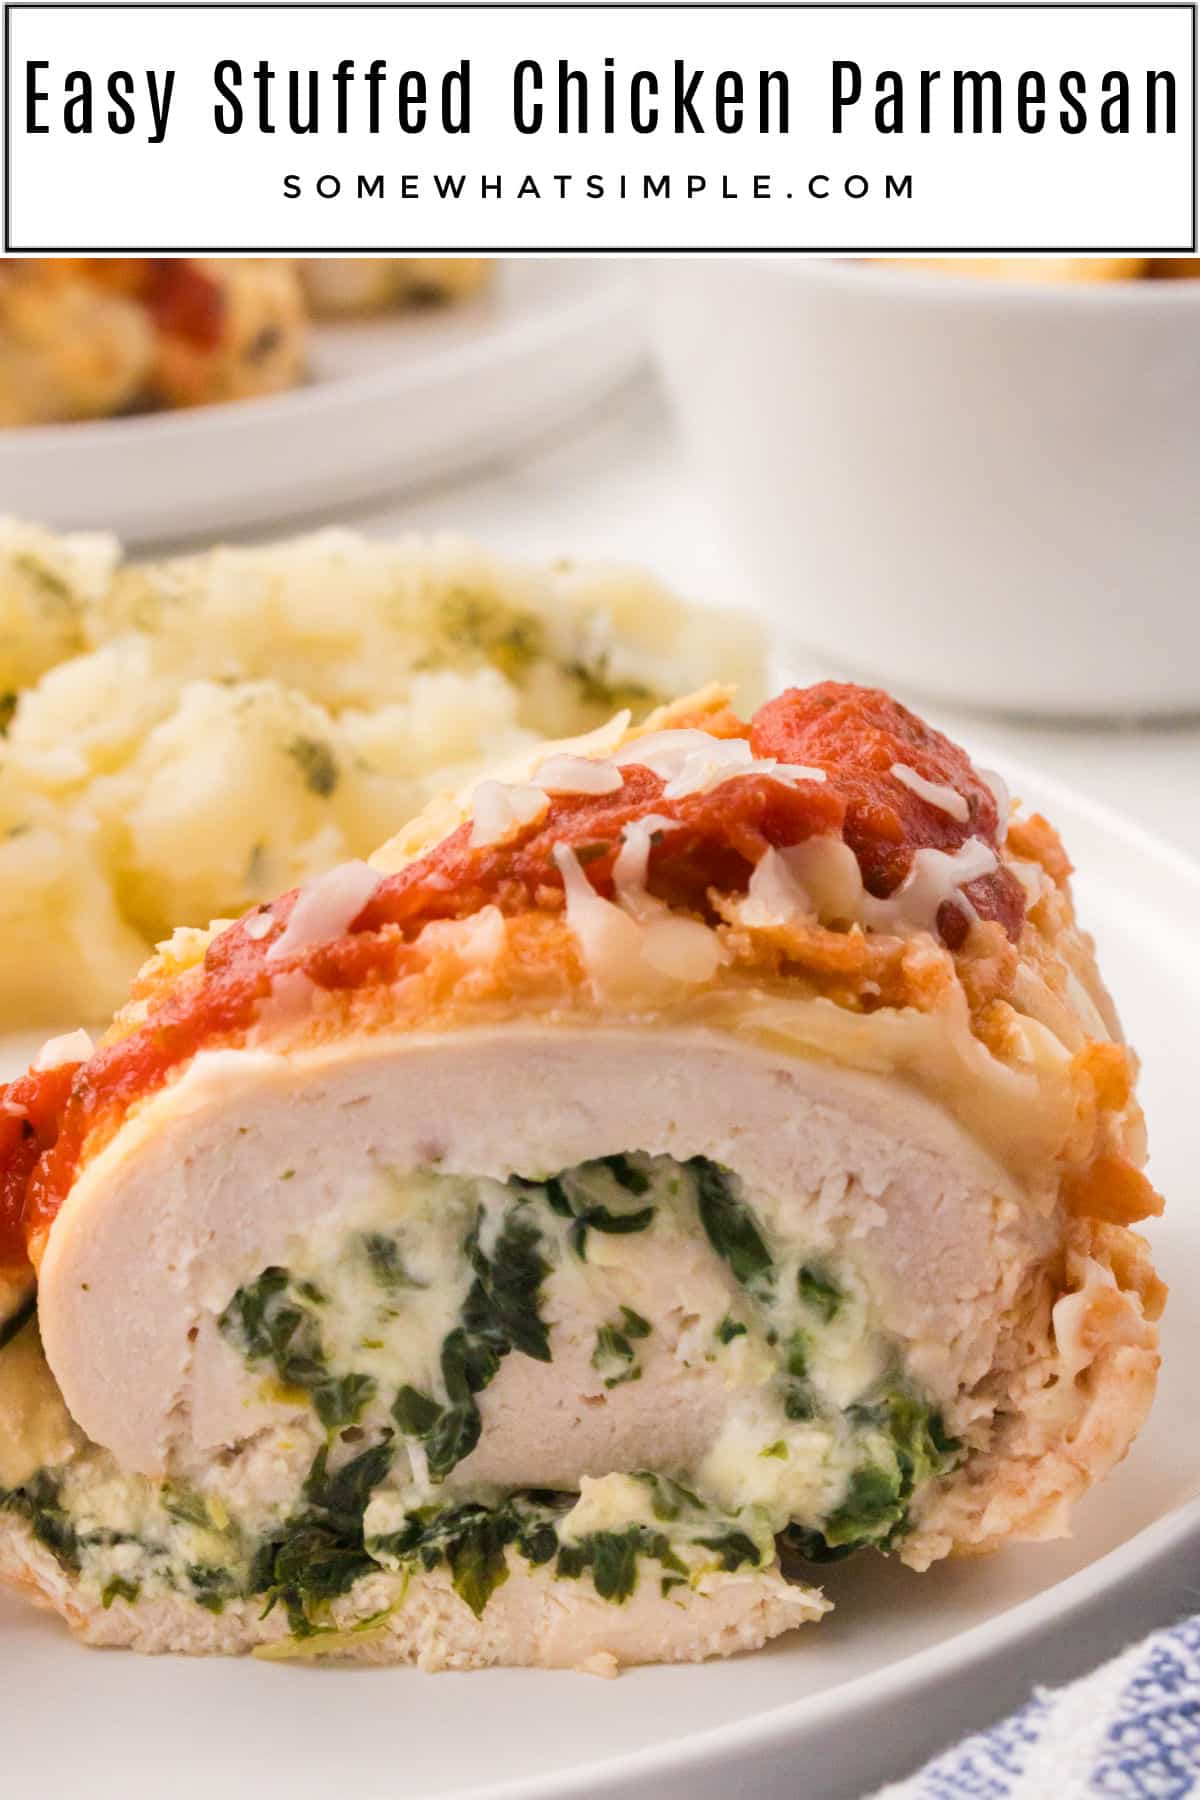 Stuffed Chicken Parmesan is a delicious twist on a favorite dinner recipe. Tender chicken filled with cheese and topped with a simple crust - it'll quickly become one of your favorite ways to make chicken for the family! via @somewhatsimple